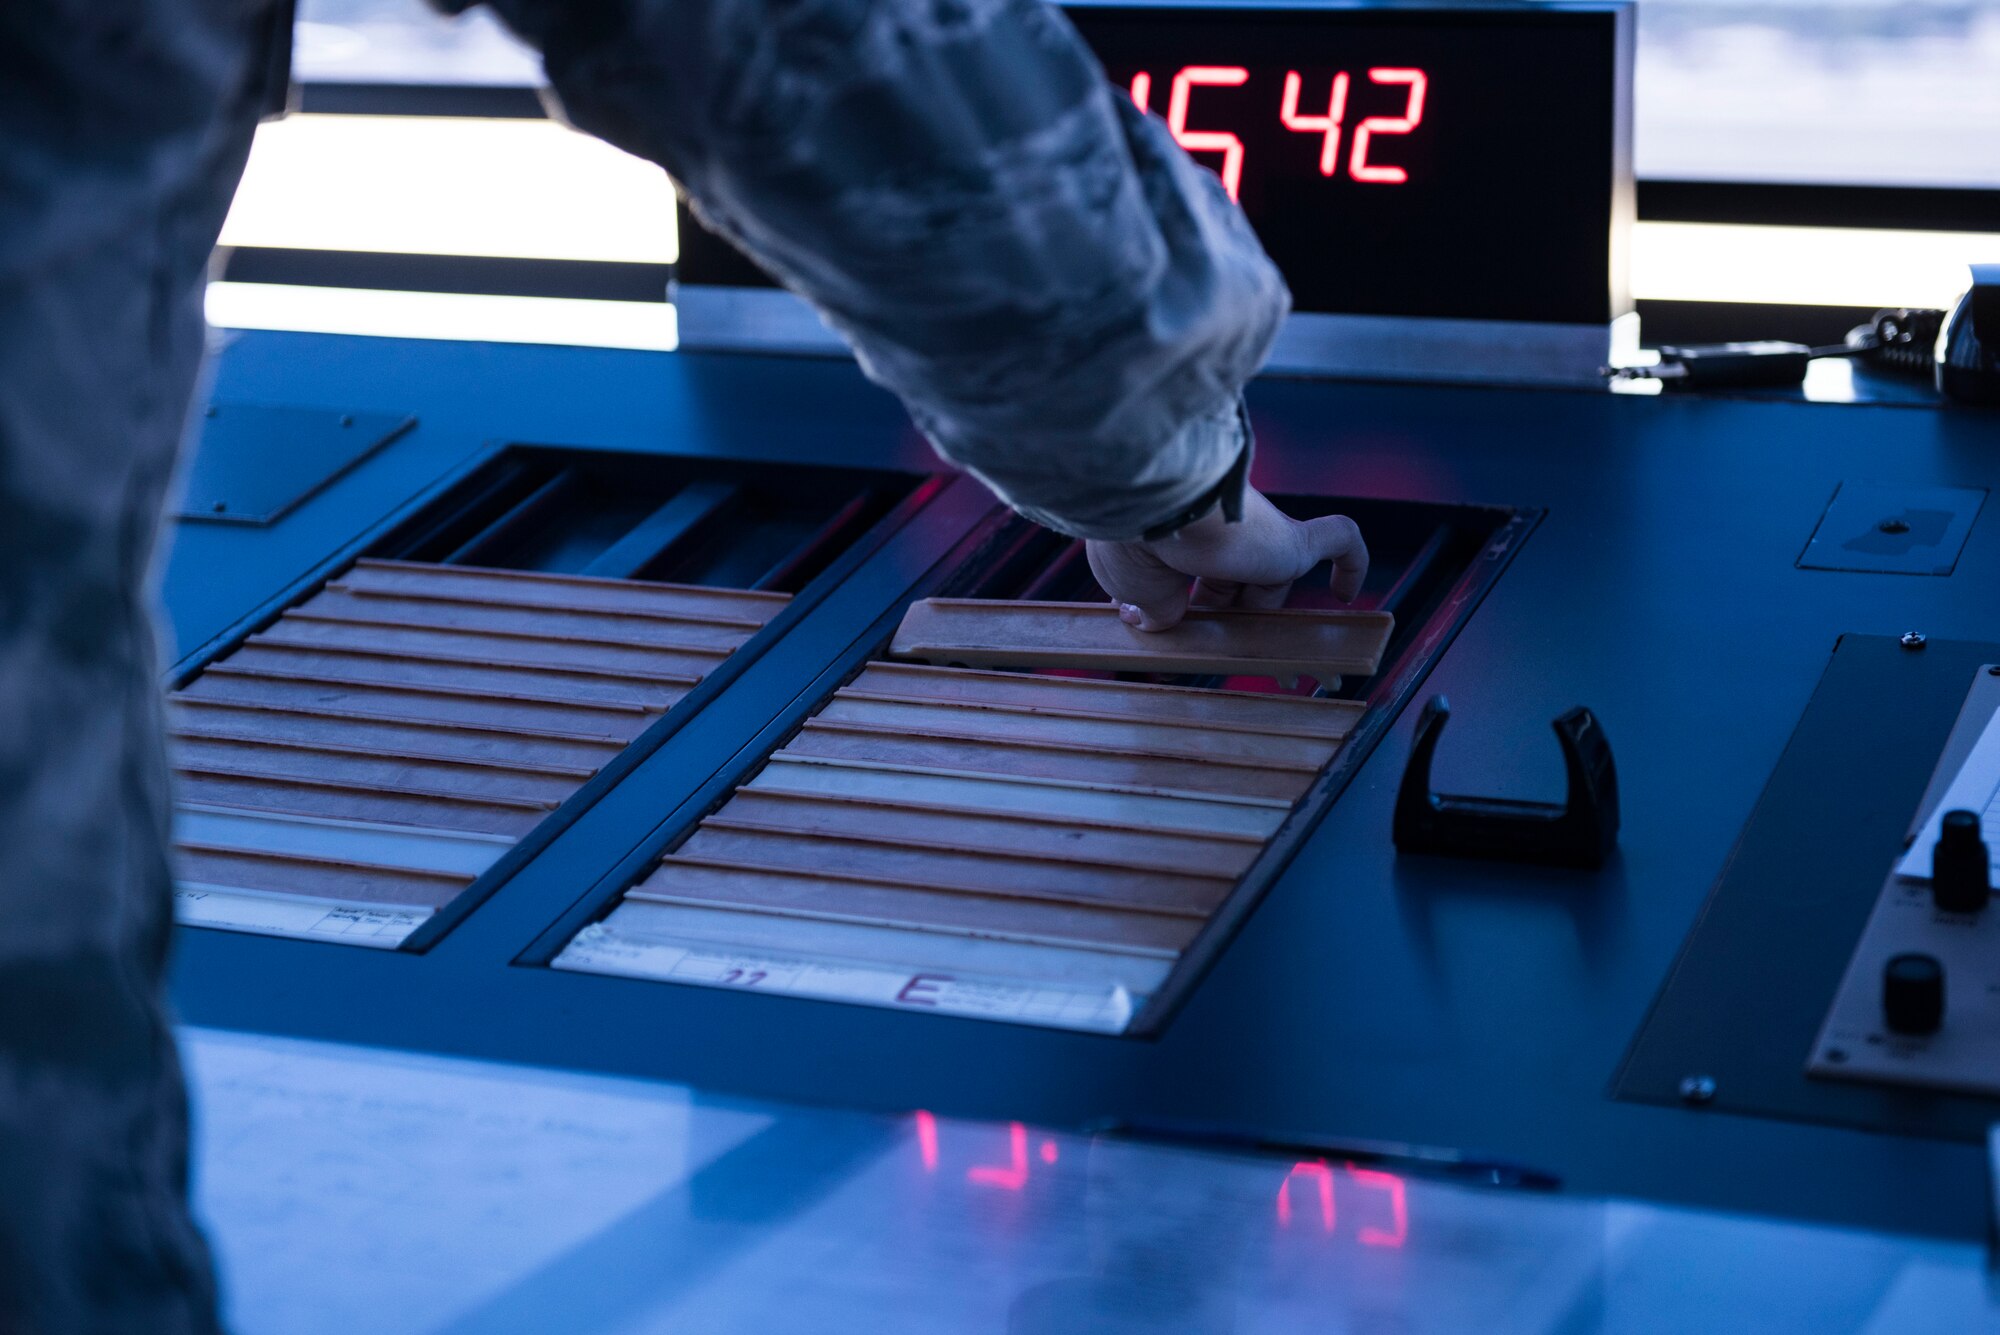 A U.S. Airman places down a “bone” on a desk in the air traffic control tower at Shaw Air Force Base, S.C., April 5, 2018.